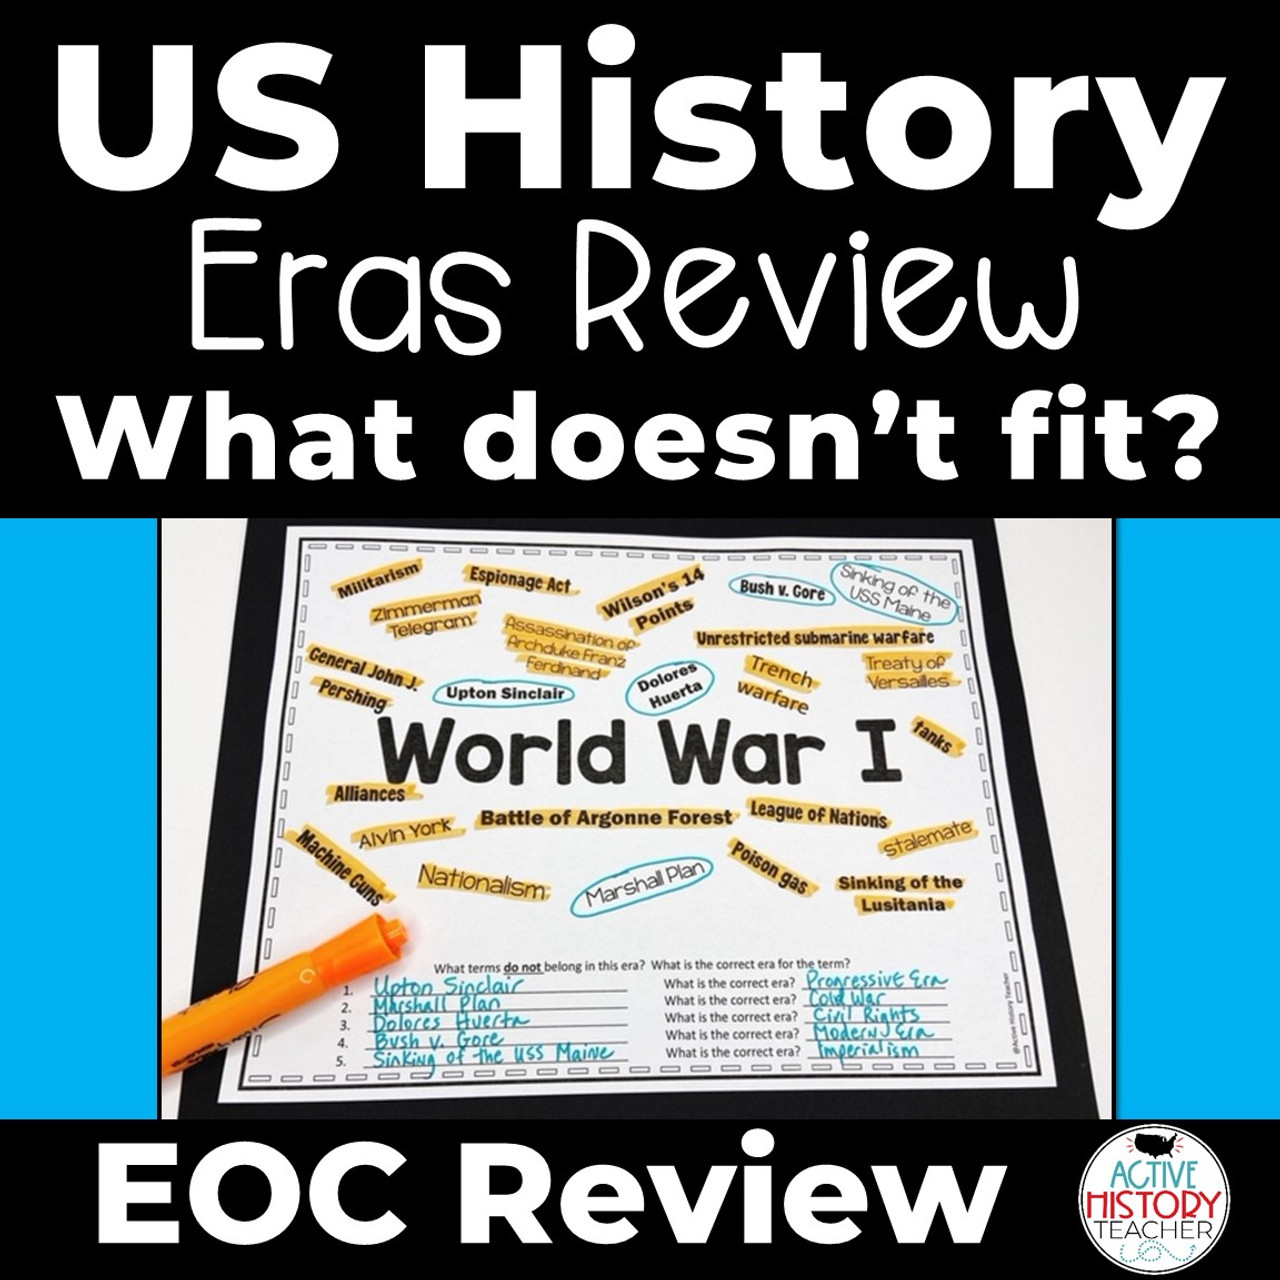 US History EOC Review Activity Eras Review What Doesn't Fit?